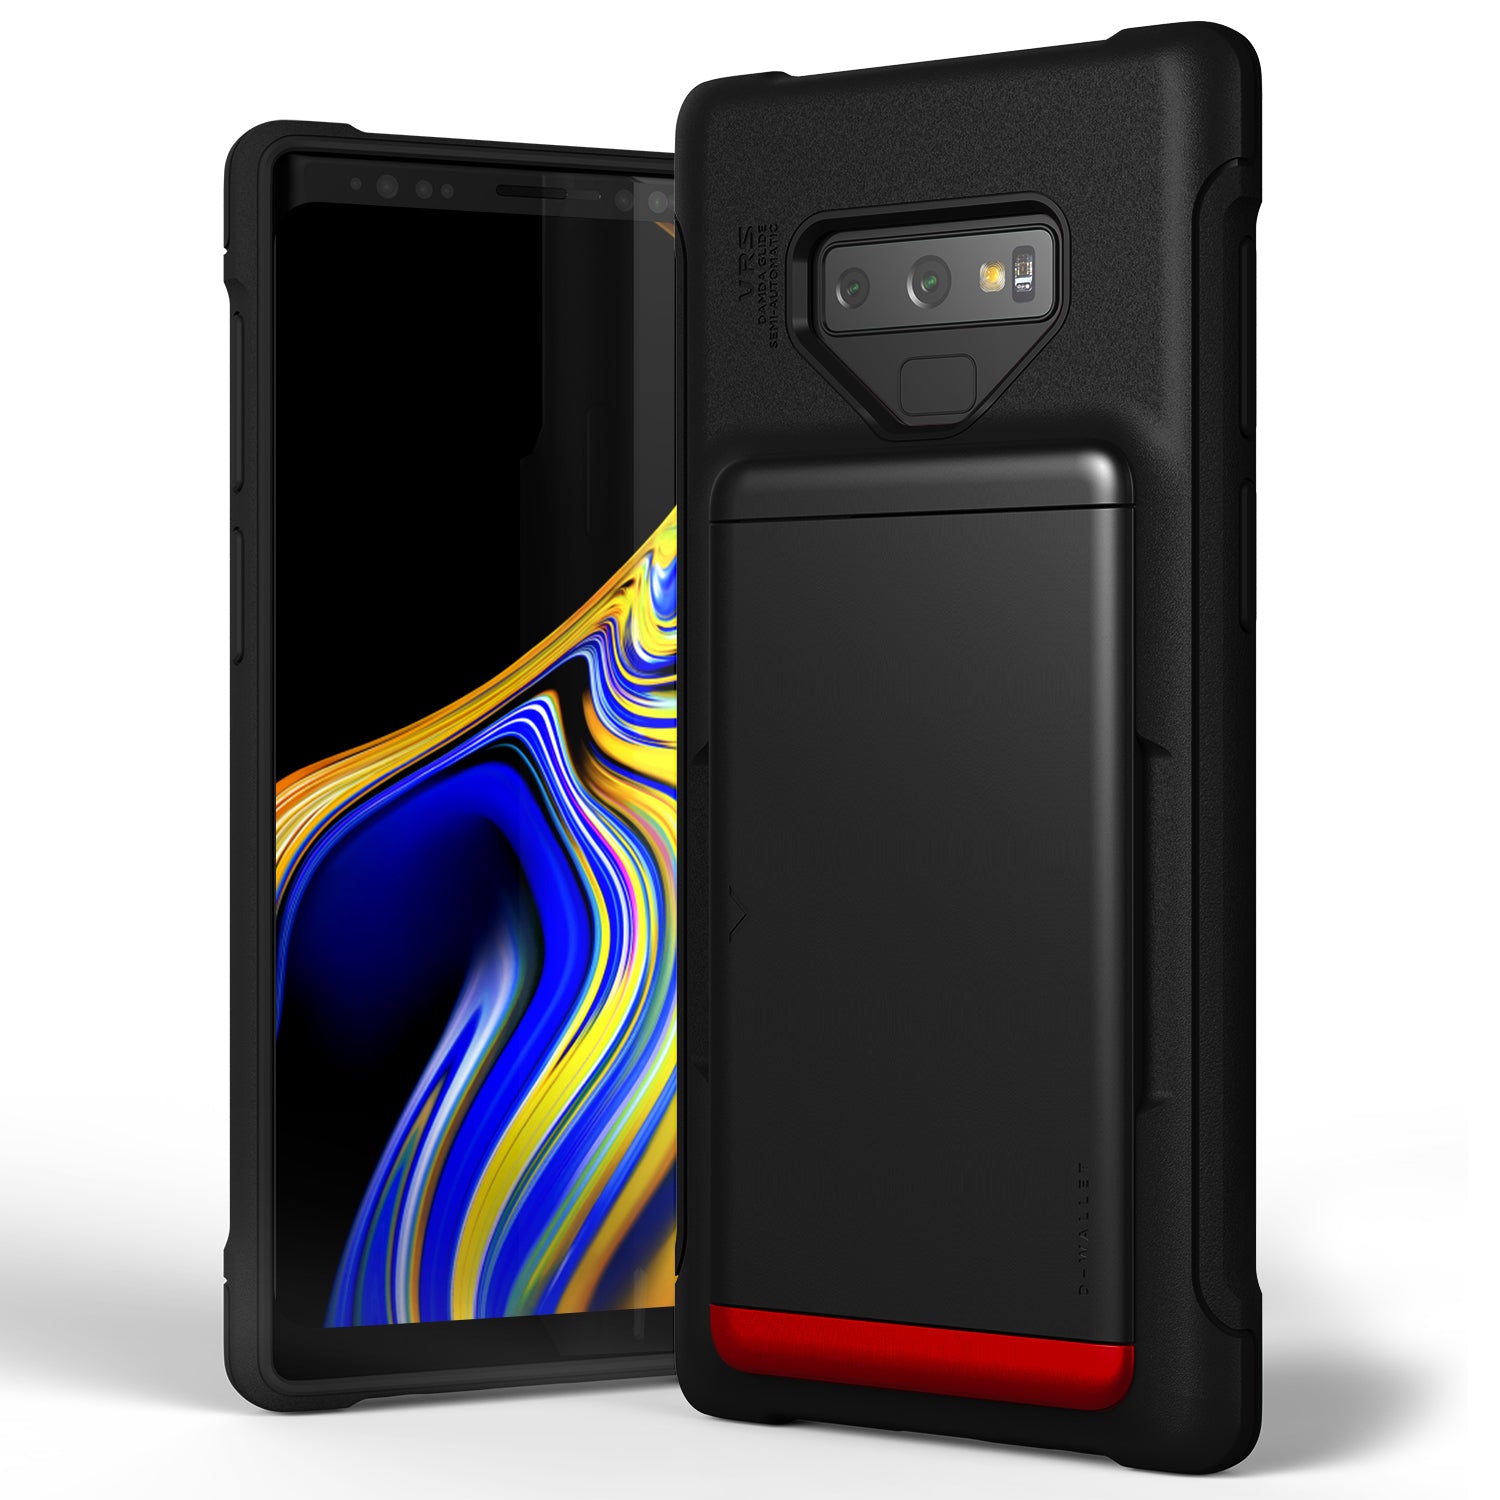 Samsung Galaxy Note 9 Plus wallet rugged case with multiple durable and convenient card slot with sleek minimalism by VRS